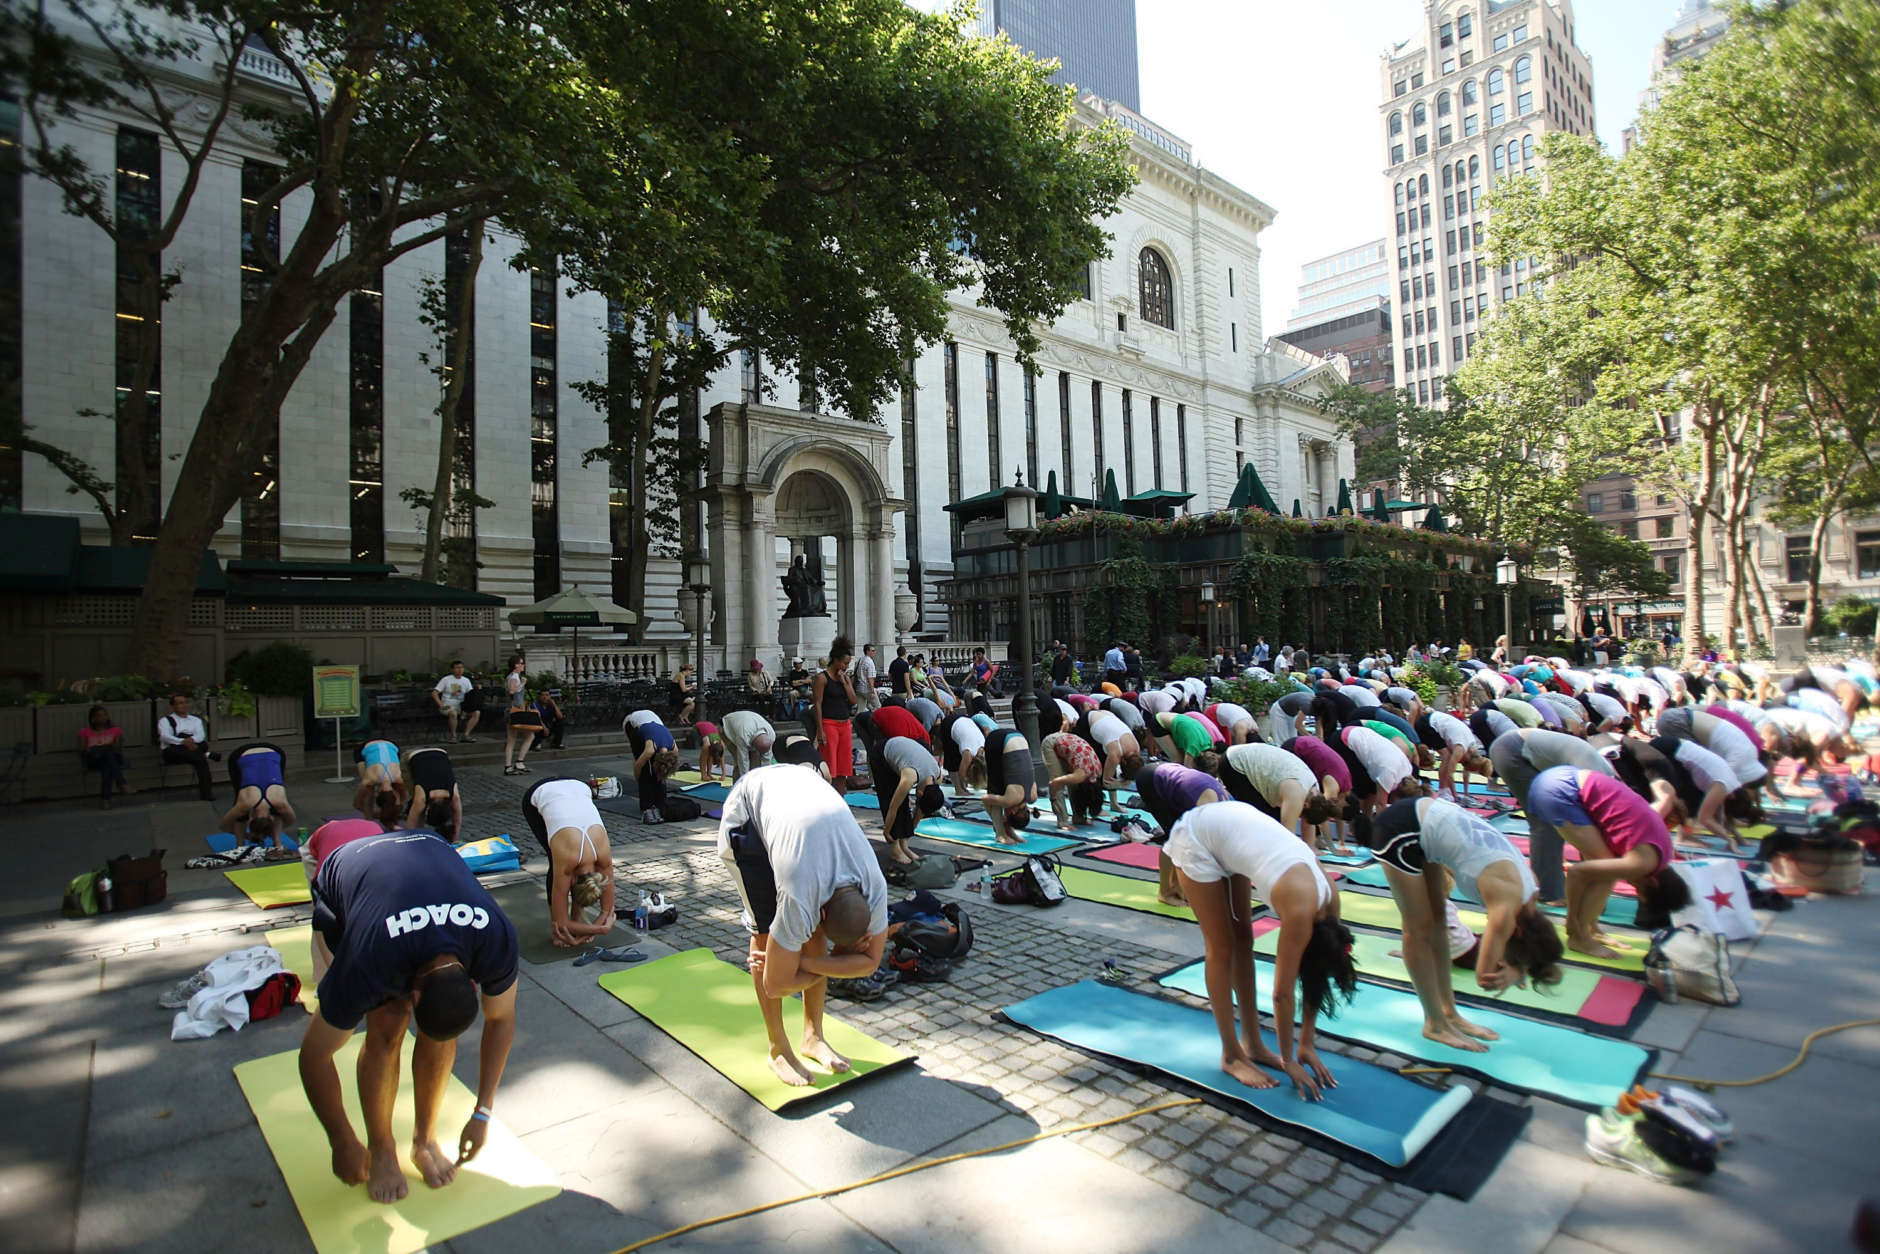 NEW YORK - JUNE 30:  People participate in a free outdoor yoga class in Bryant Park on June 30, 2009 in New York City.  After weeks of unseasonably wet weather, New York and New England have been experiencing dry and warm days which have brought about a flurry of activity in area parks and recreation areas.  (Photo by Spencer Platt/Getty Images)